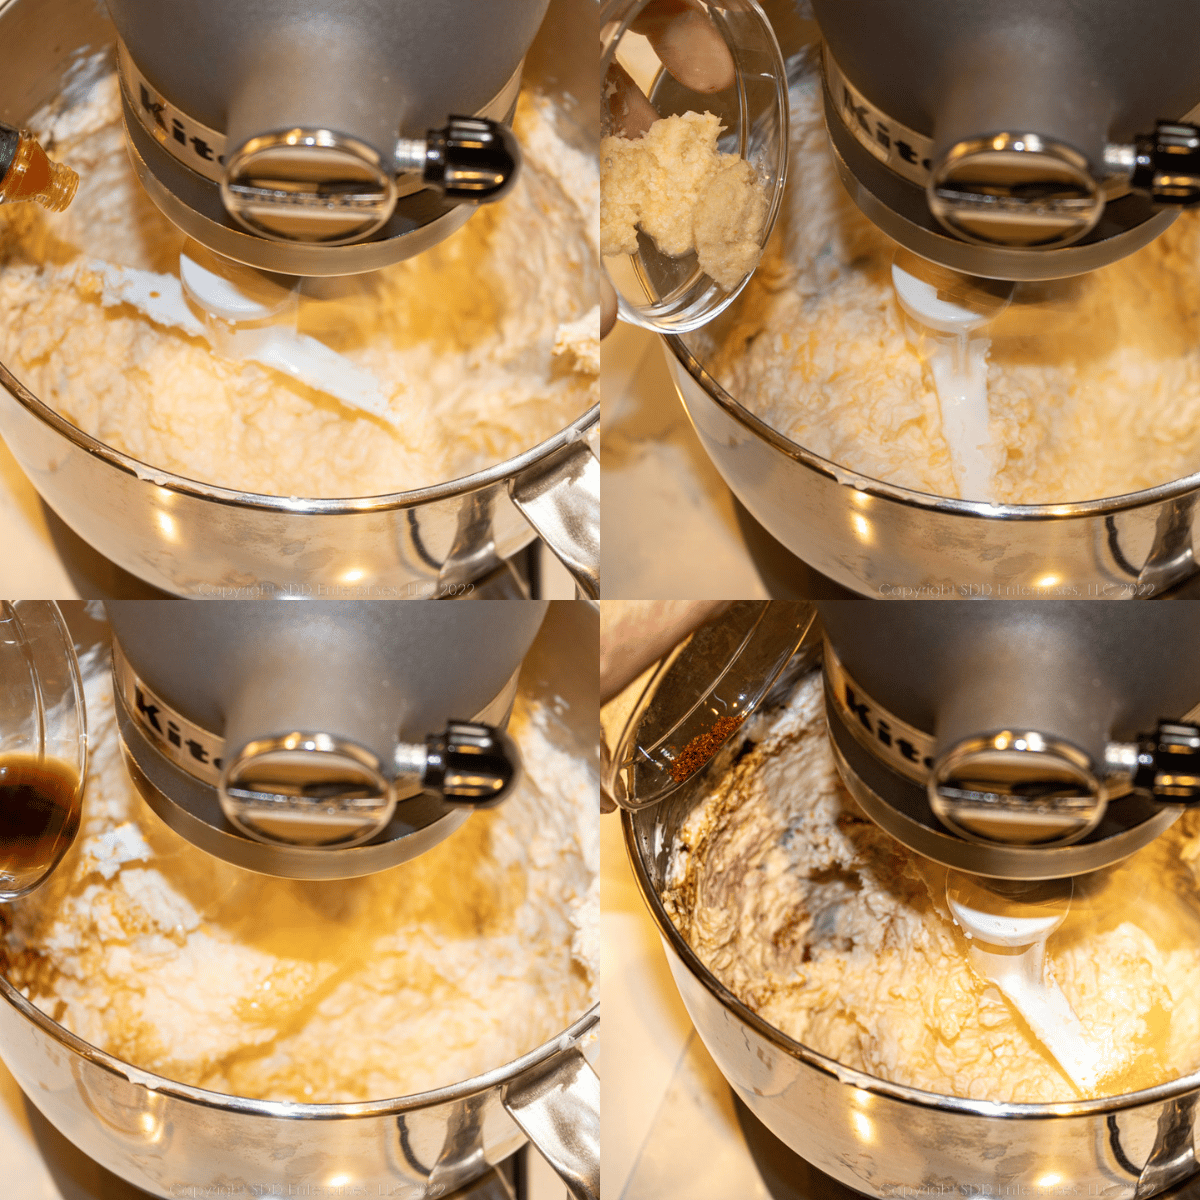 Adding seasonings to soft cheeses in a stand mixer